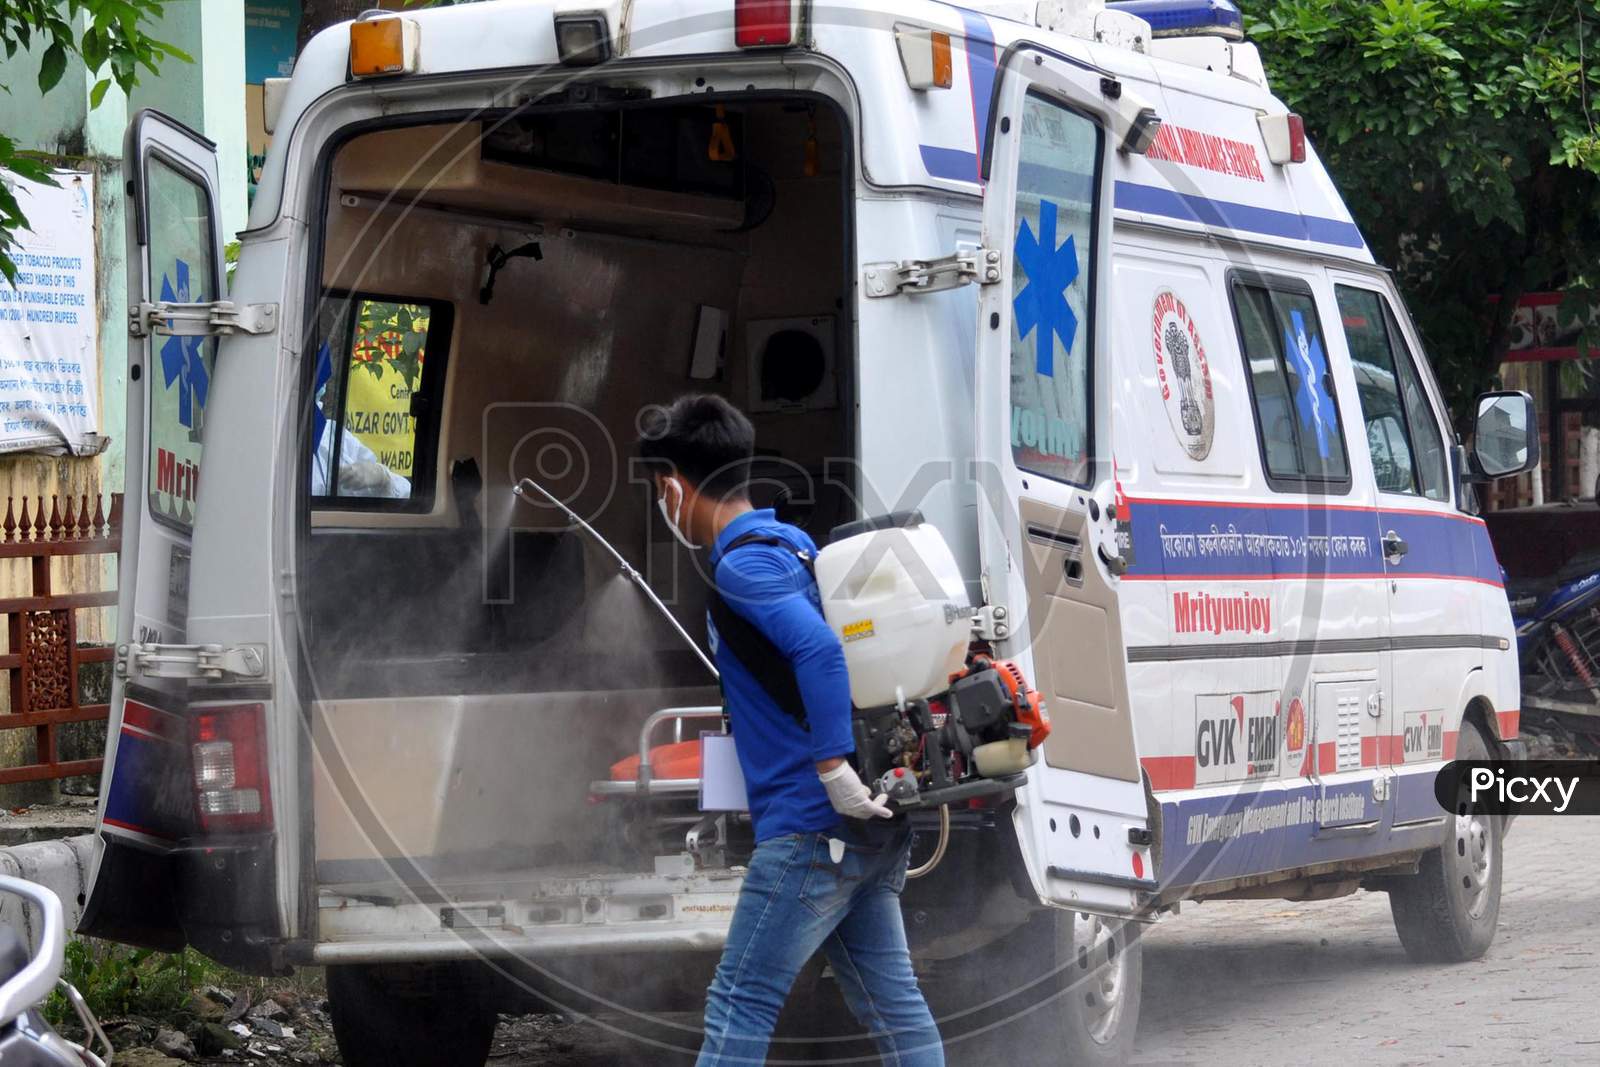 A health worker sprays disinfectant on an ambulance outside a hospital in Guwahati, Assam on July 06, 2020.